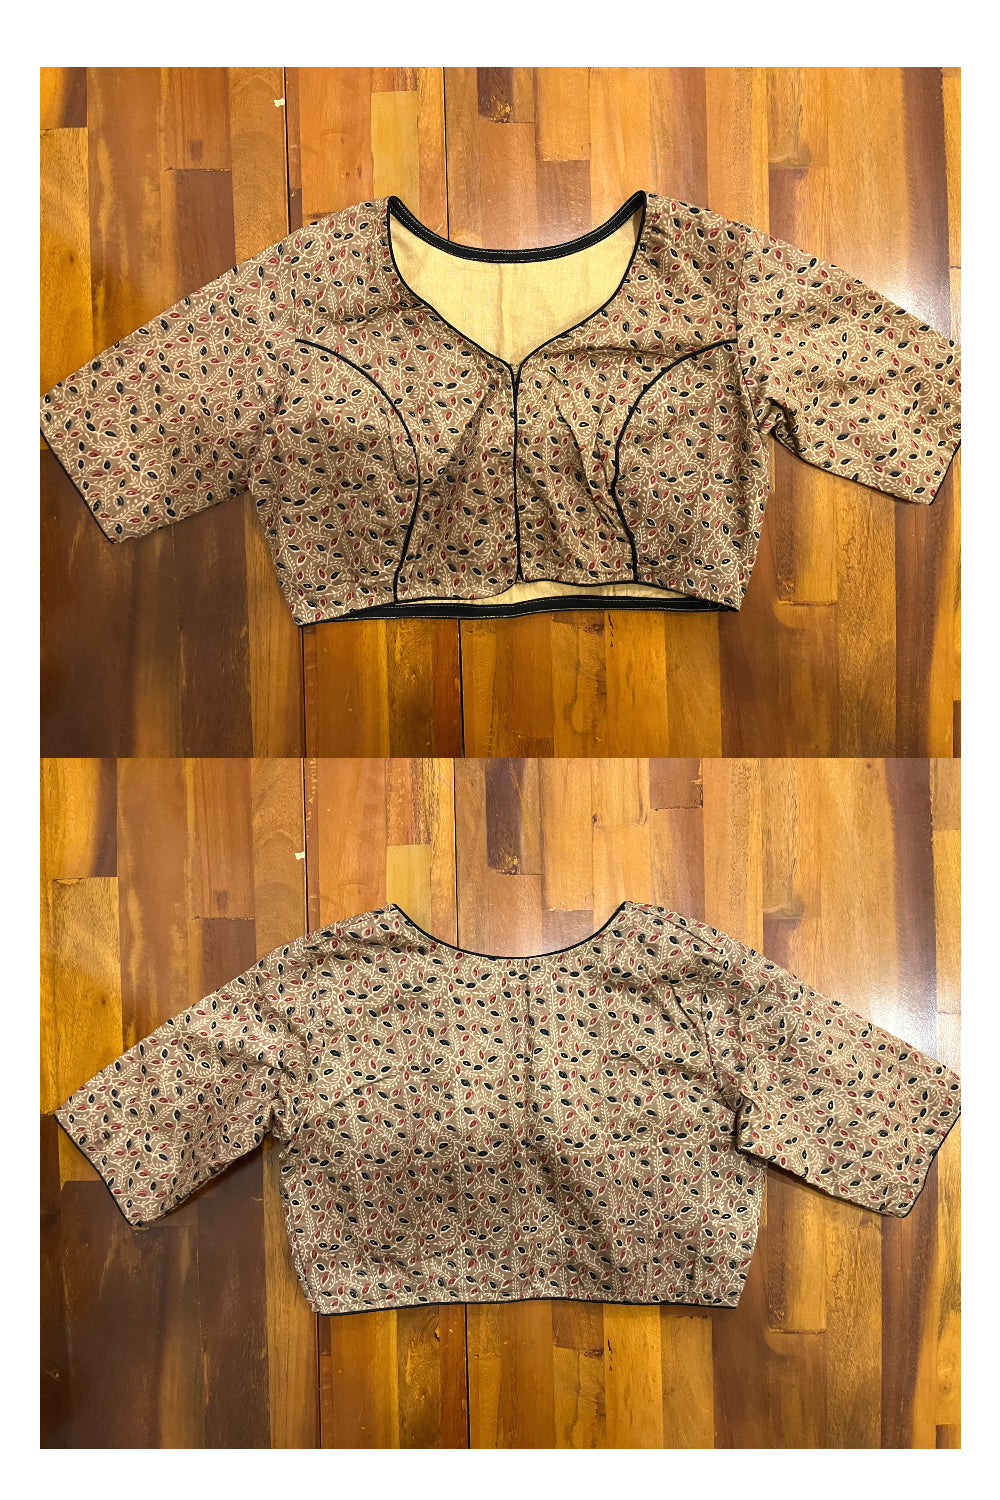 Southloom Printed Light Brown Ready Made Blouse